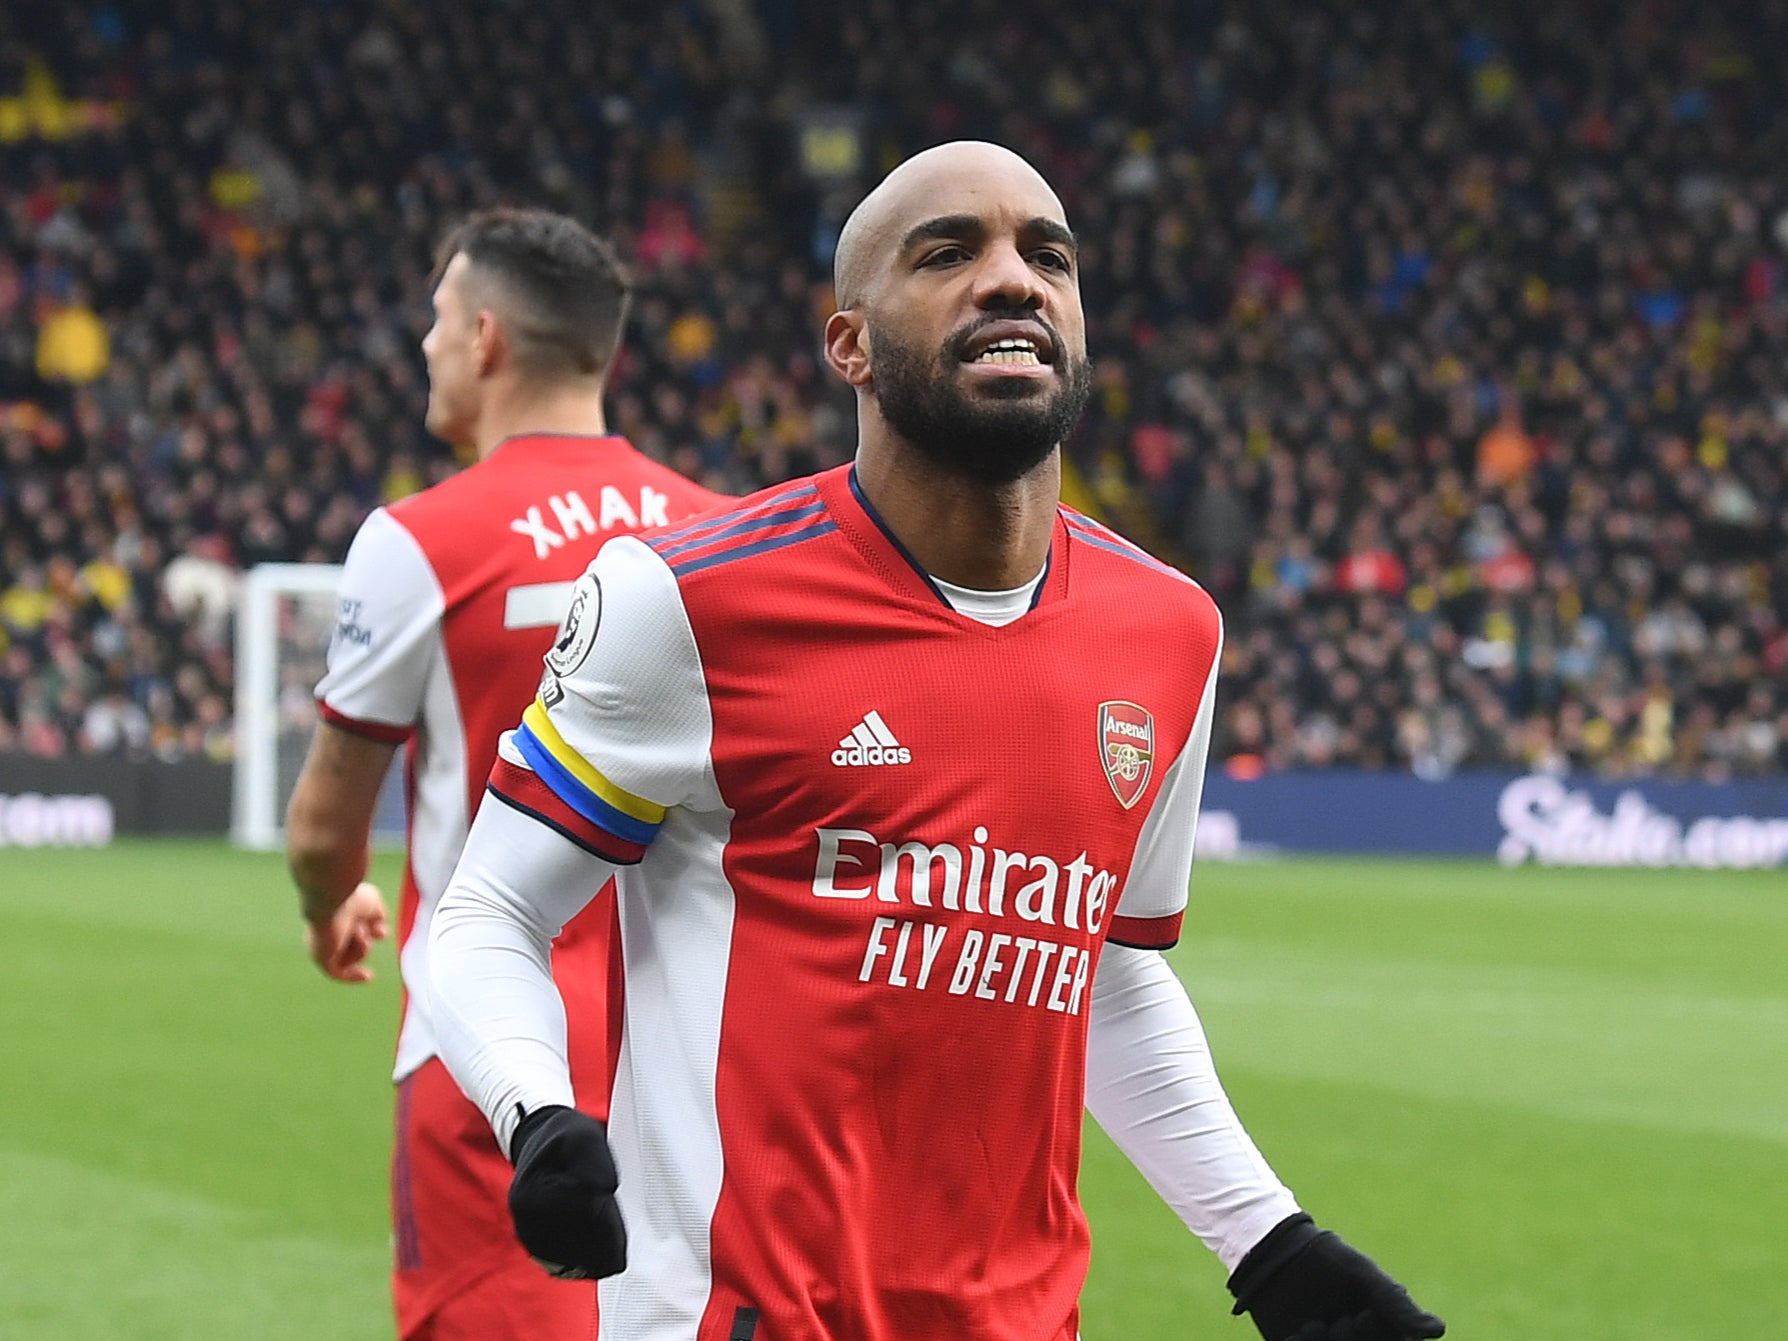 Alexandre Lacazette’s link-up play against Watford was appreciated by Bukayo Saka: ‘It’s so fun to play with him. He put that ball in the perfect spot for me’